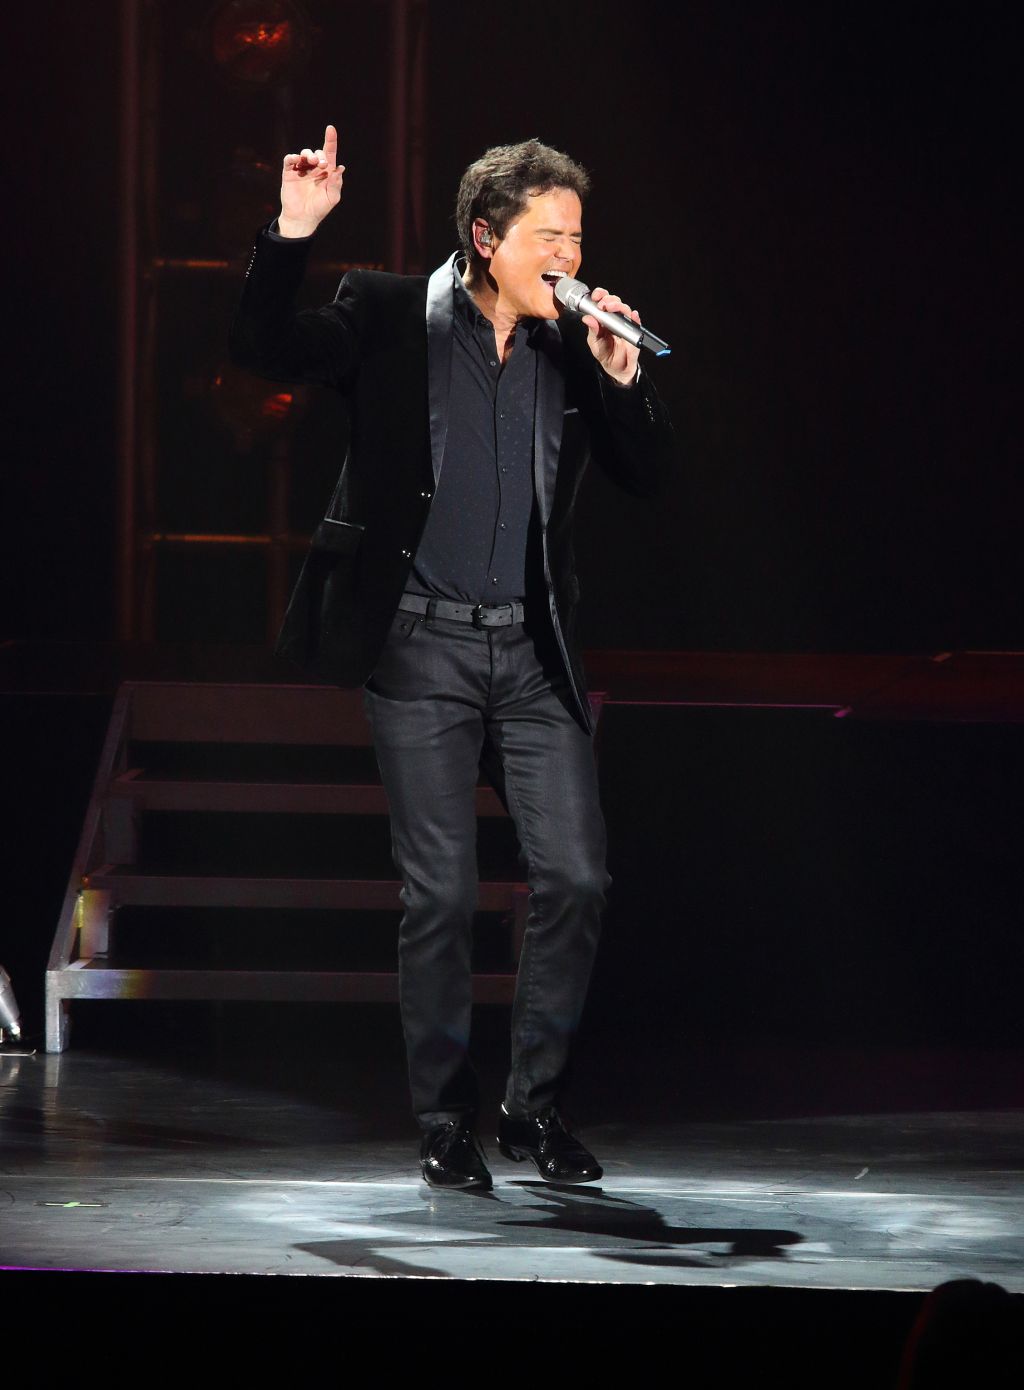 Donny Osmond performs live at the Eventim Apollo